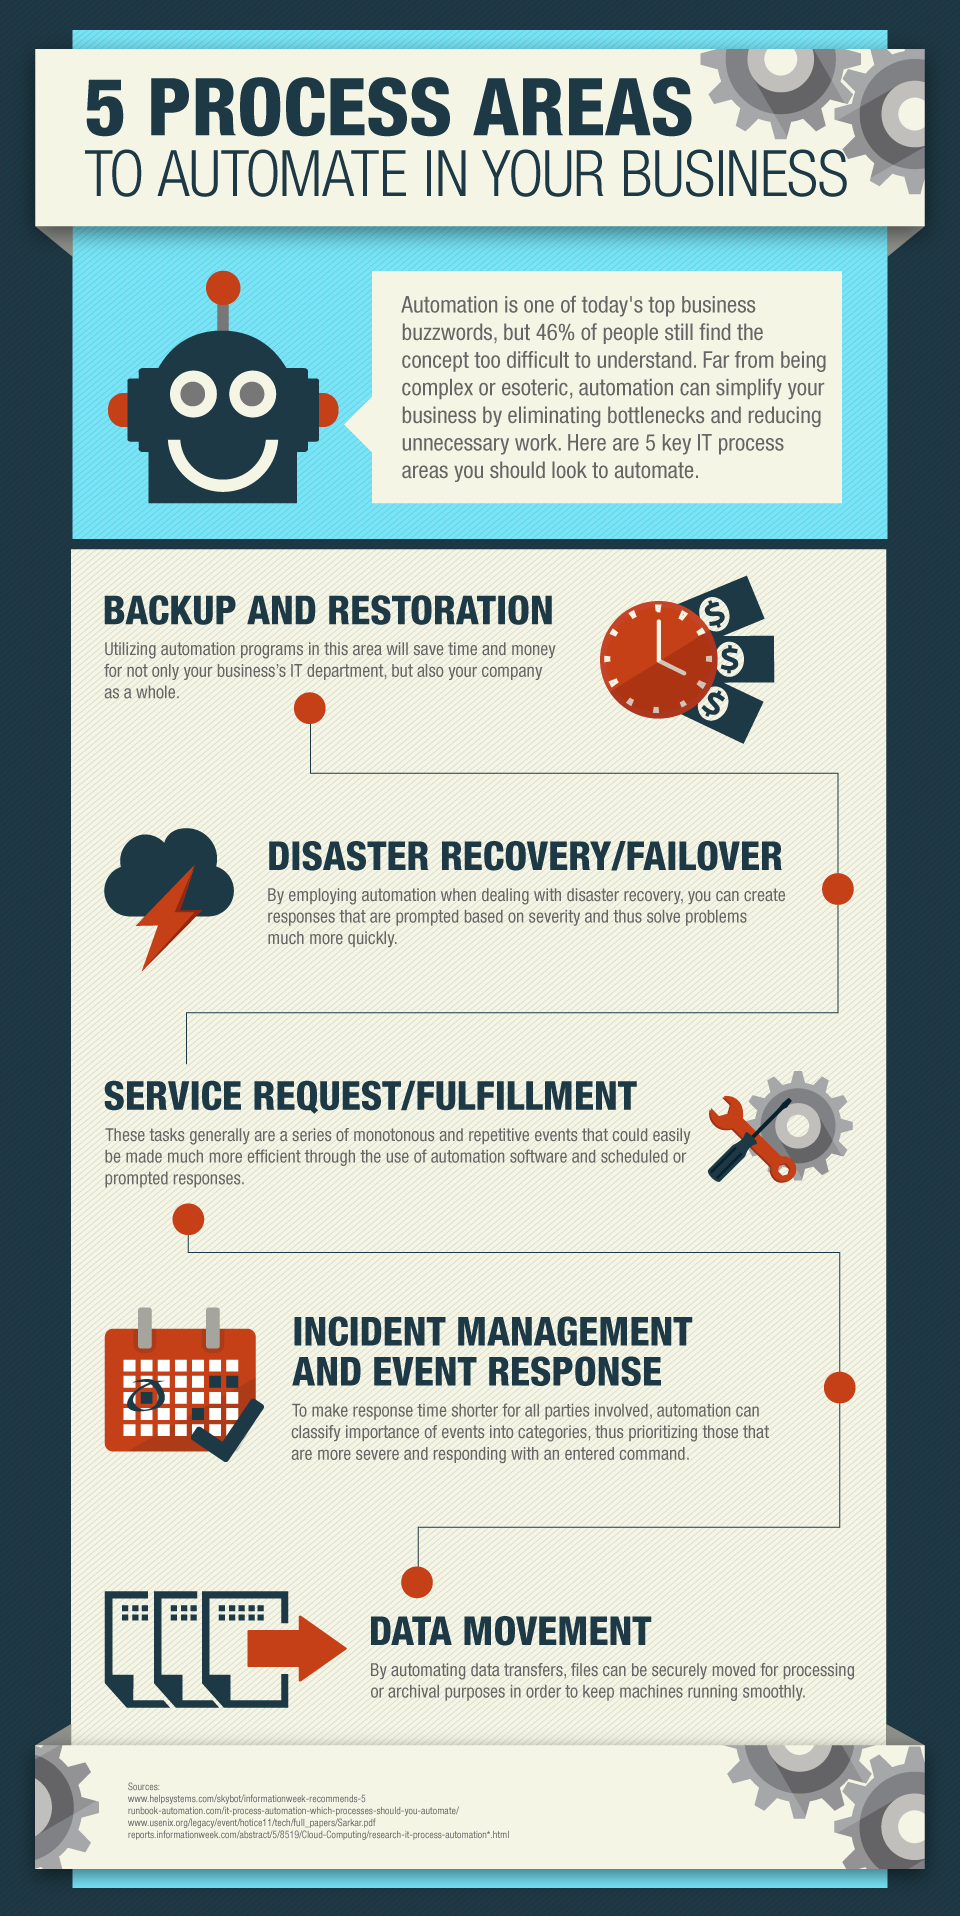 HelpSystems Automation Infographic